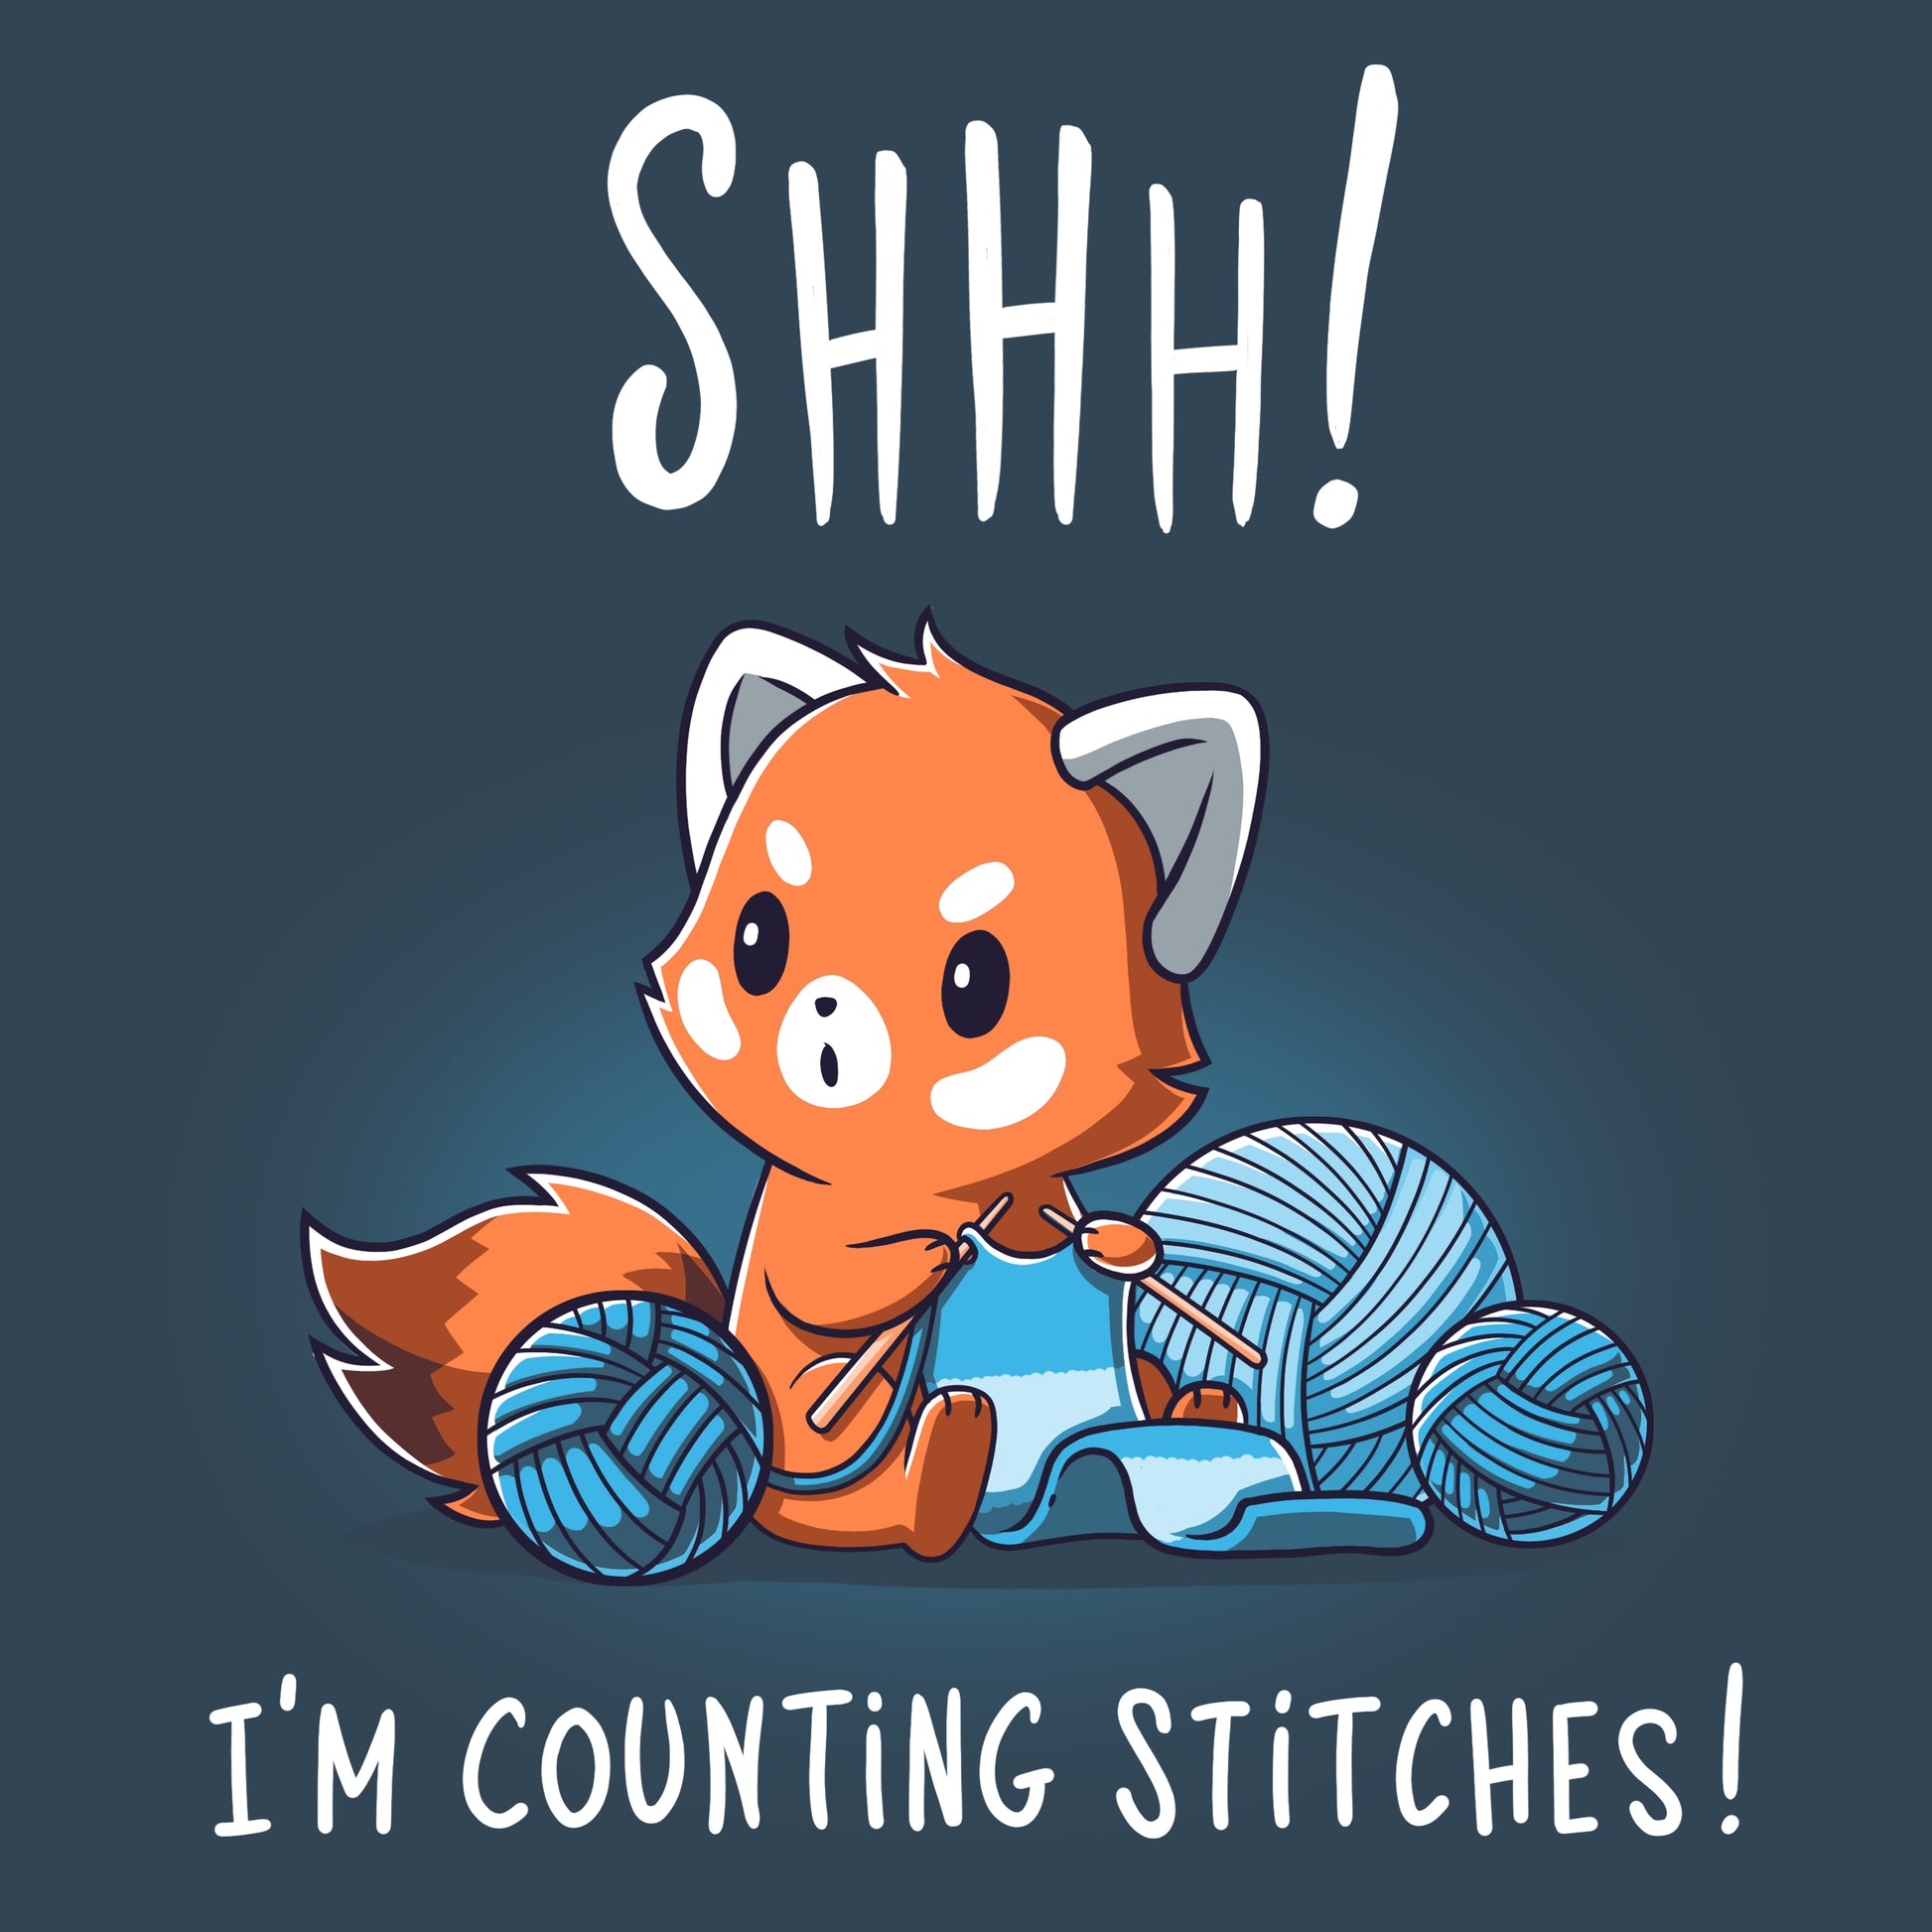 Shhh, I'm counting stitches on a Shhh! I'm Counting Stitches! T-shirt from TeeTurtle.